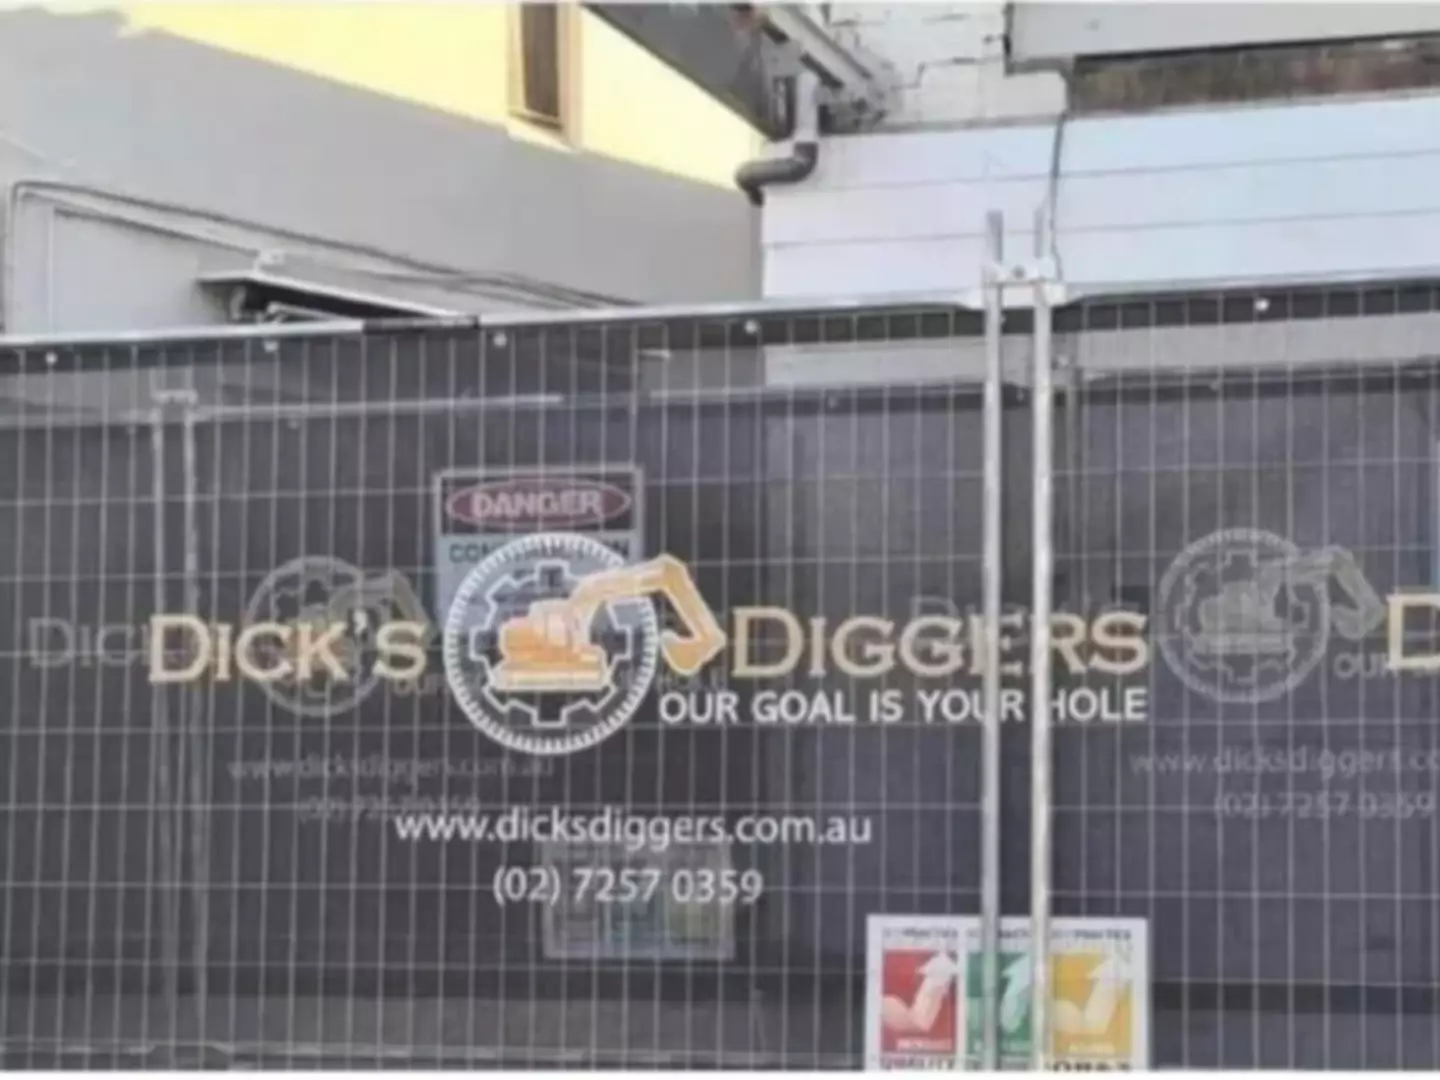 A man has complained about a ‘crude’ sign on display at a construction site in Australia.